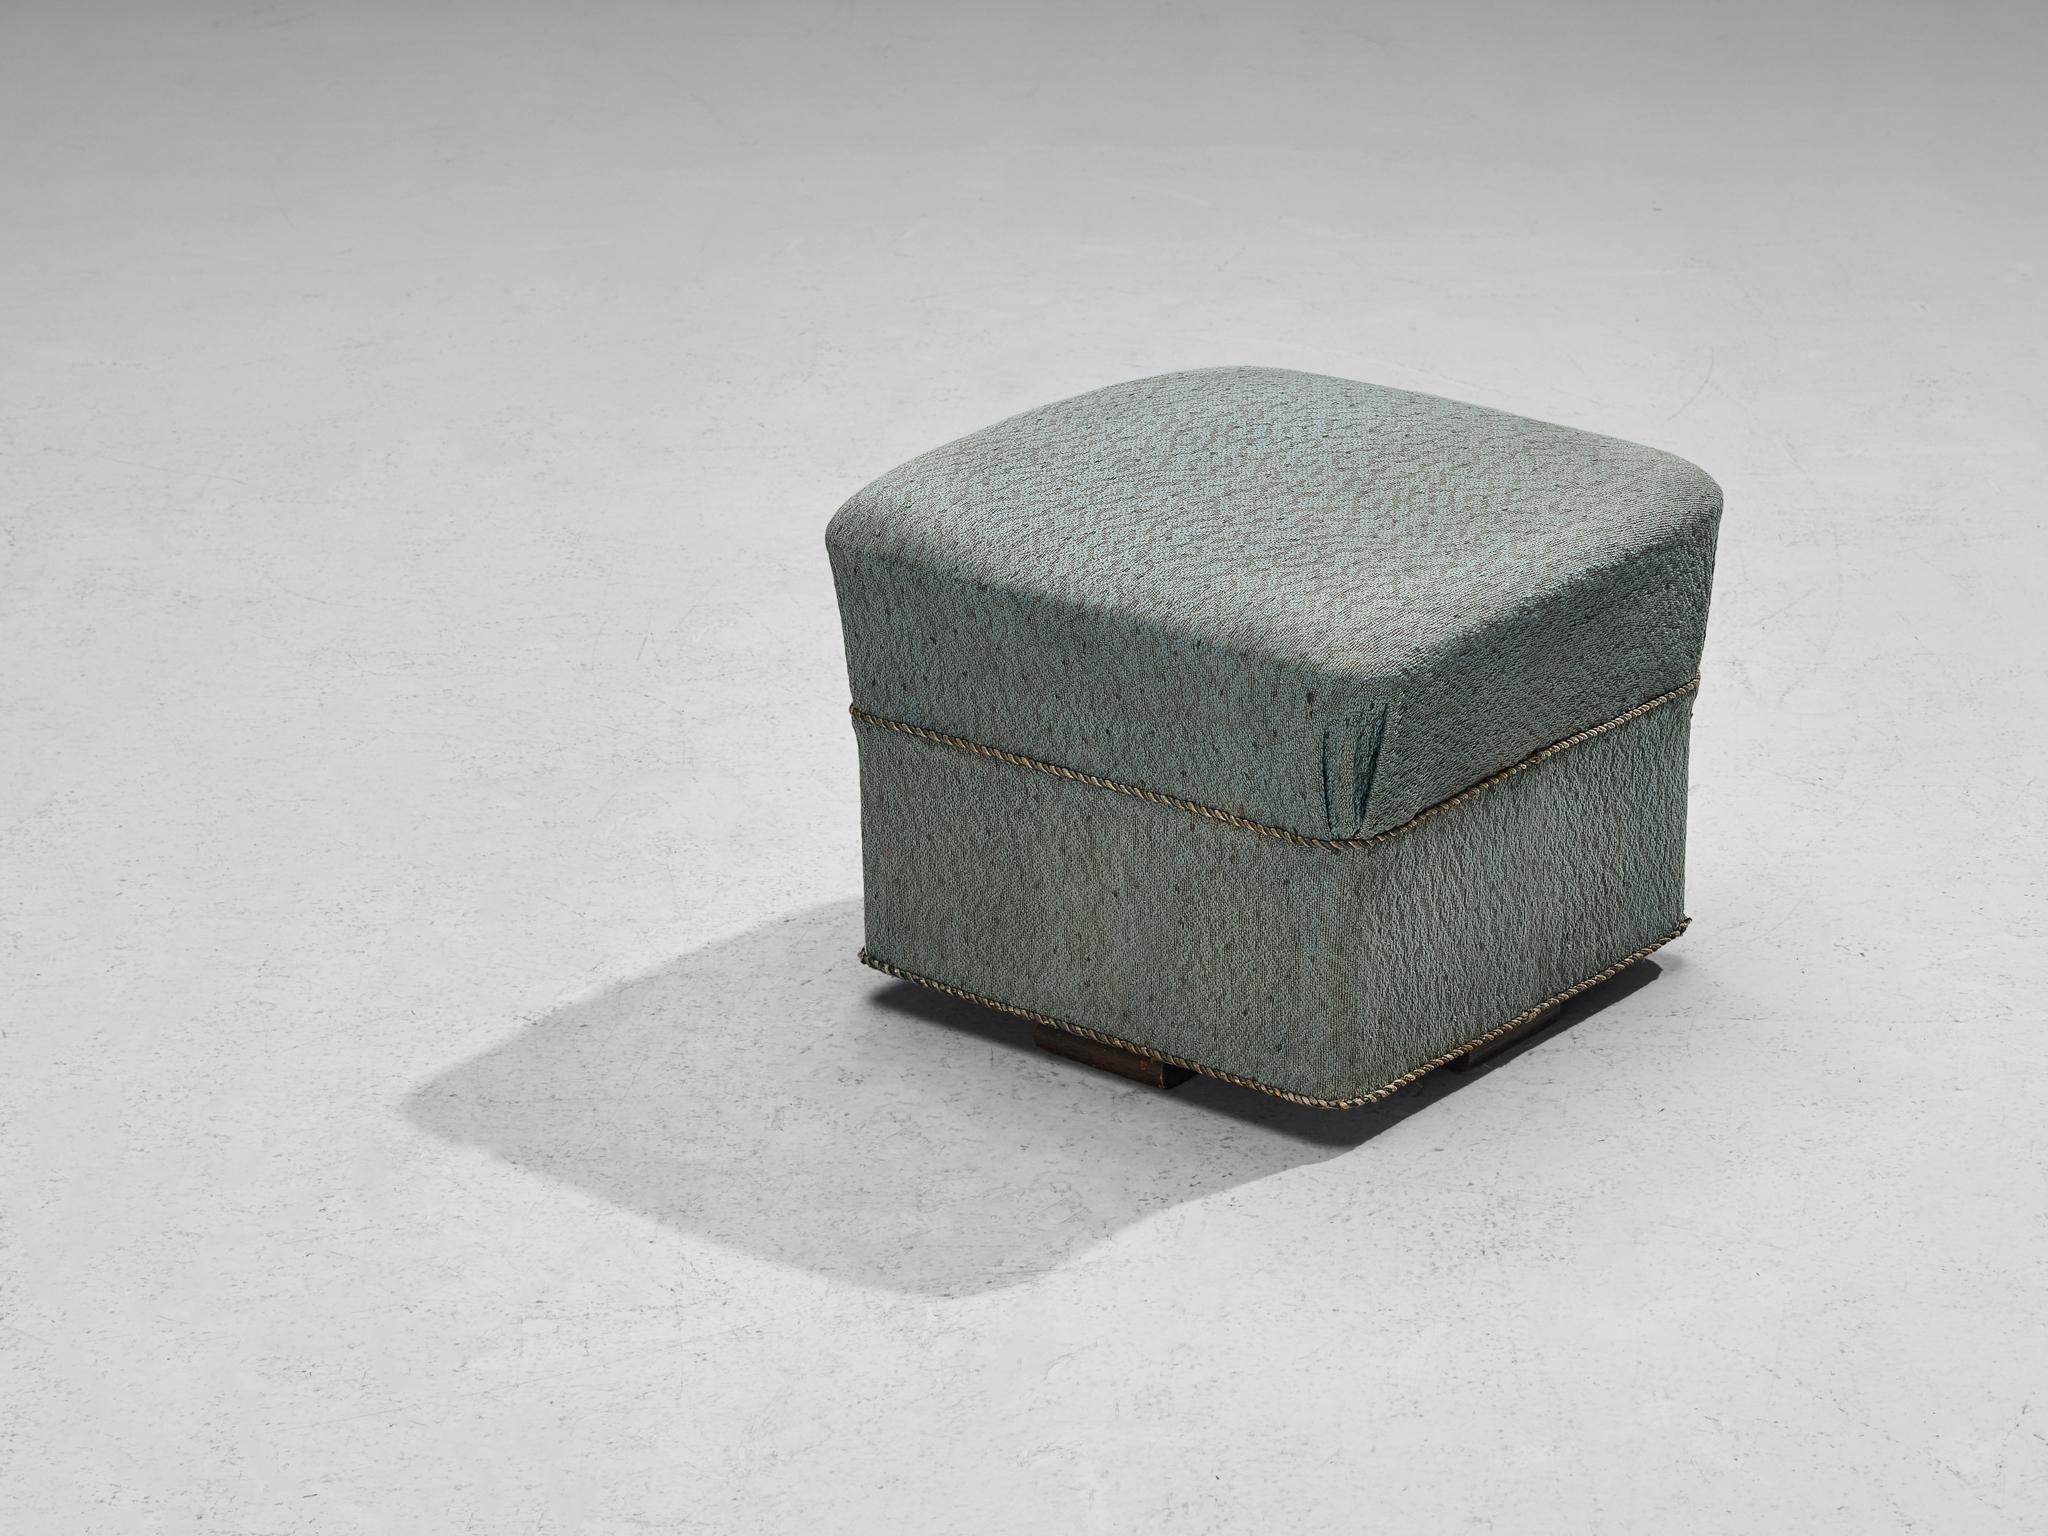 Jindrich Halabala for UP Závody, footstool / tabouret / ottoman, fabric, stained oak, Czech Republic, 1930s.

This poetic pouf is designed in the 1930s when the Art Deco Period was at its highest point and distinguishes itself by means of artistic